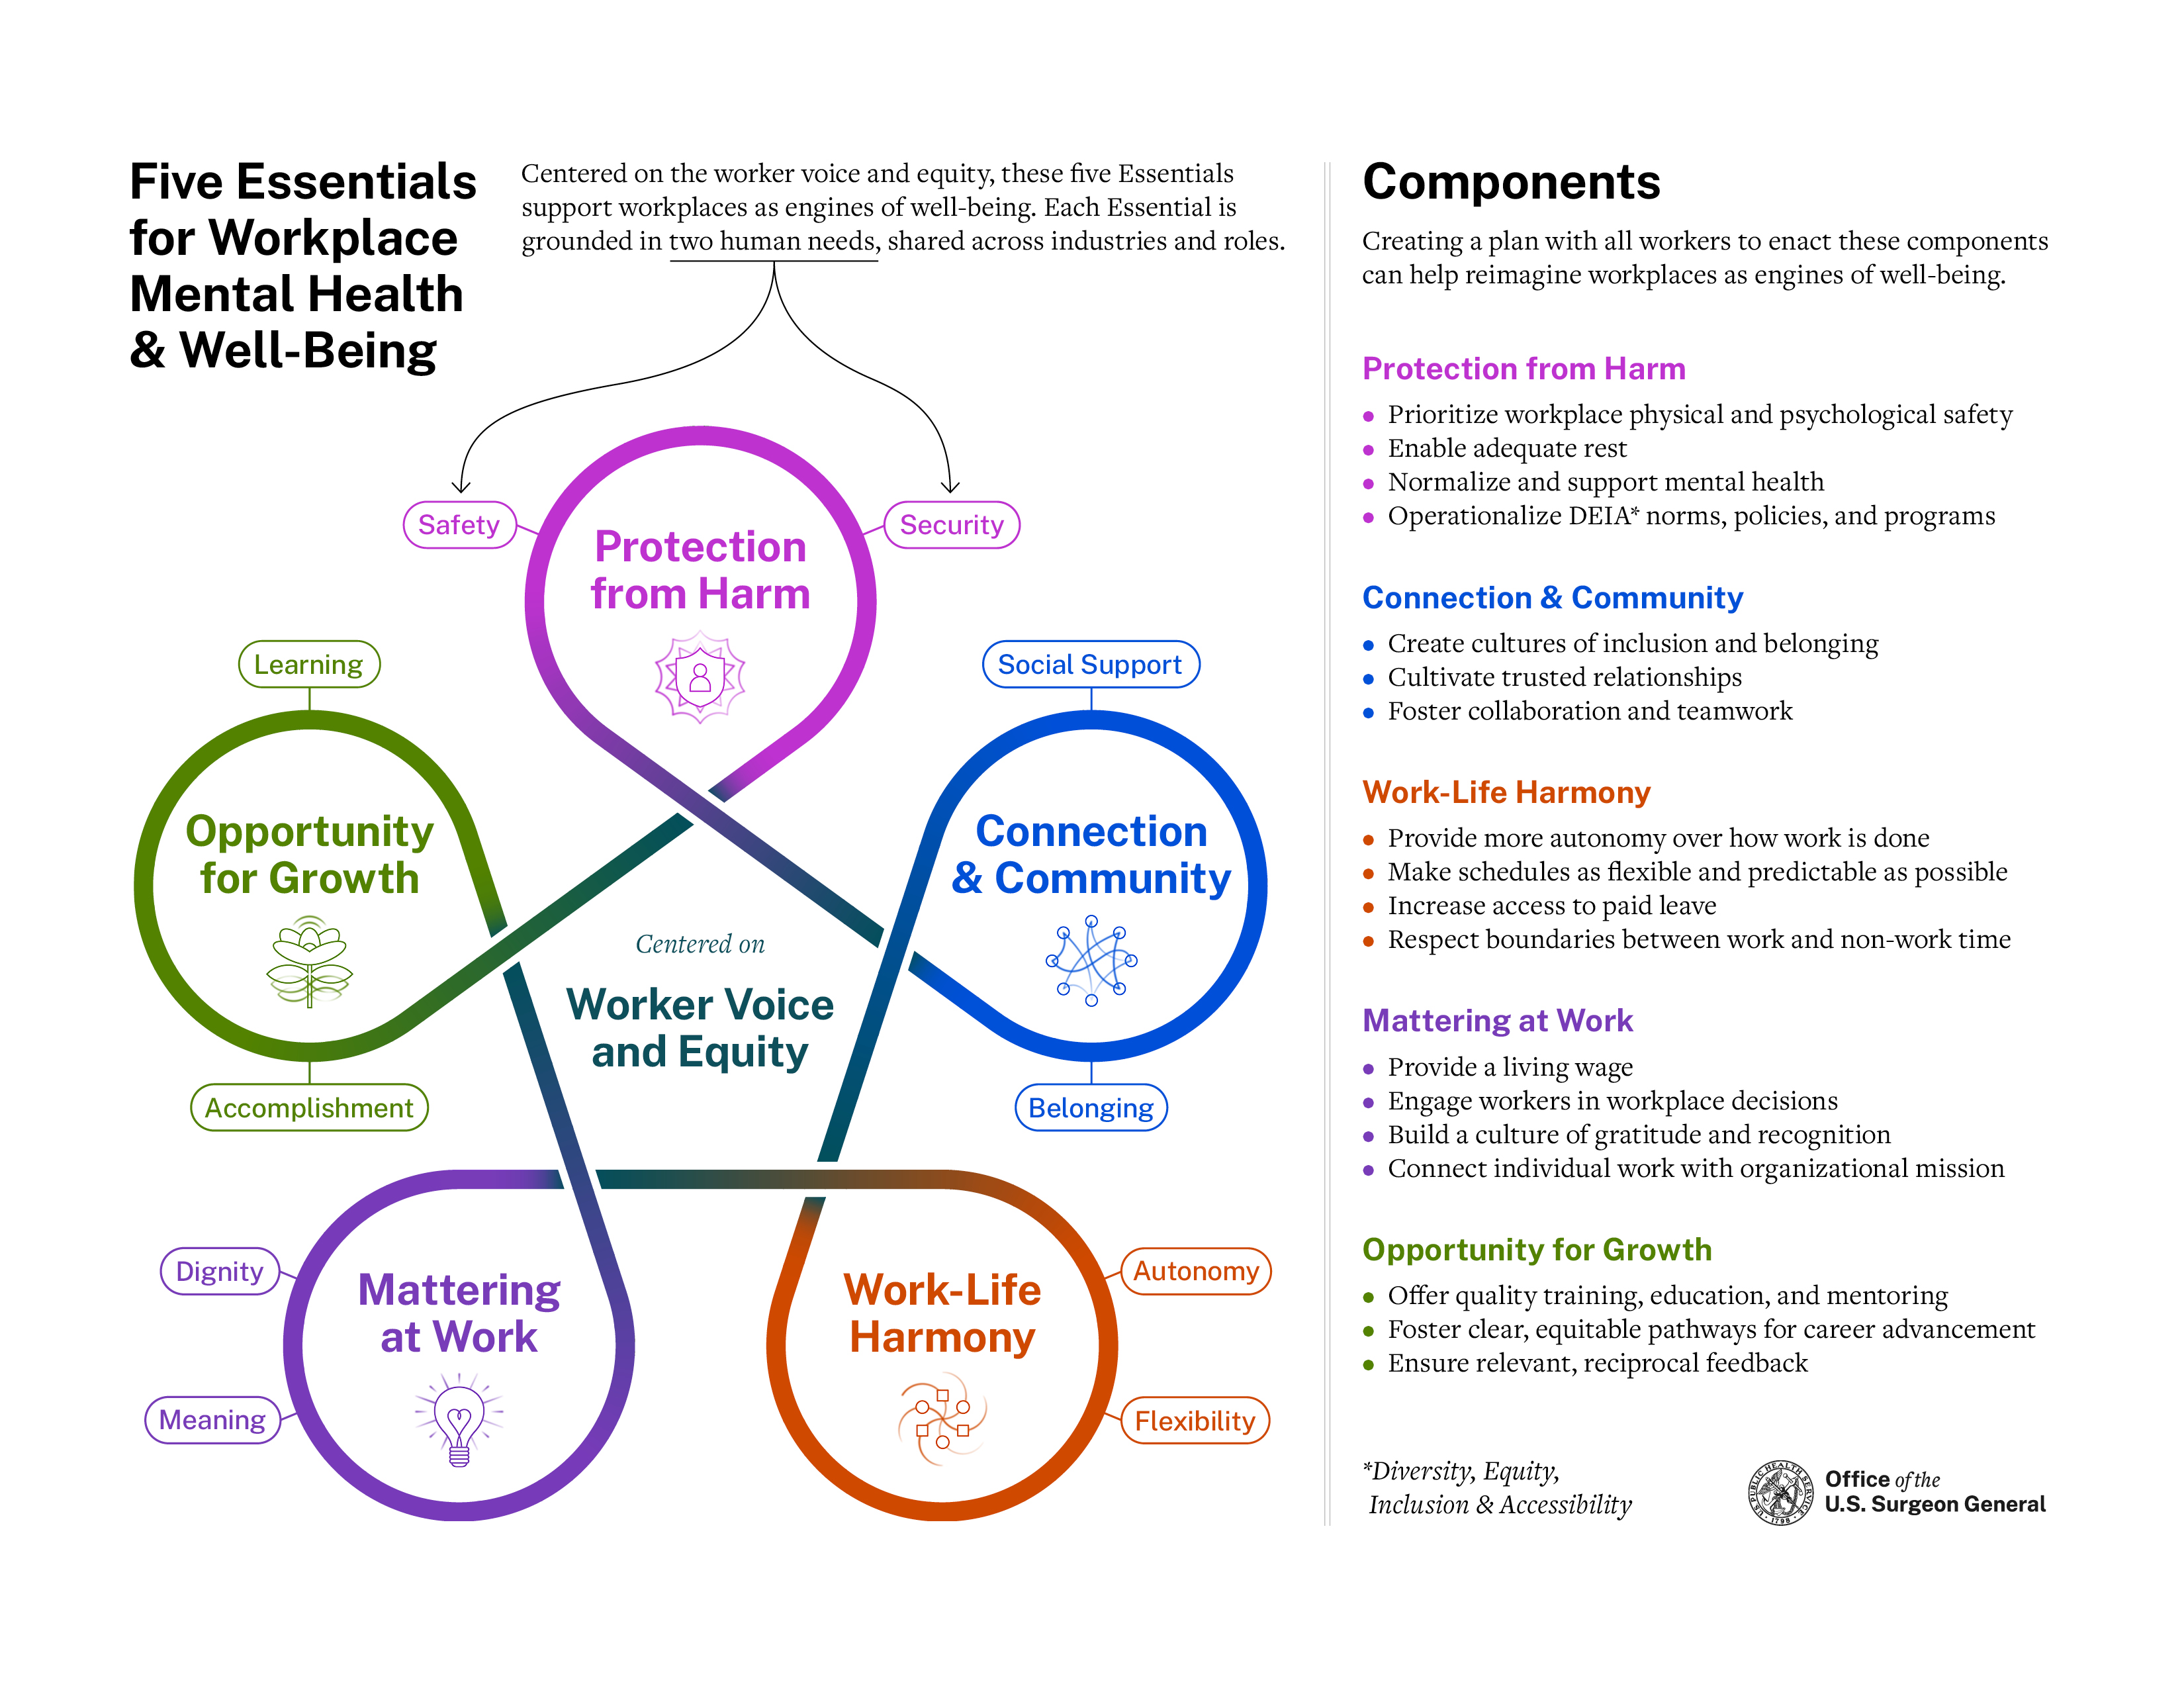 Five Essentials for Workplace Mental Health & Well-Being